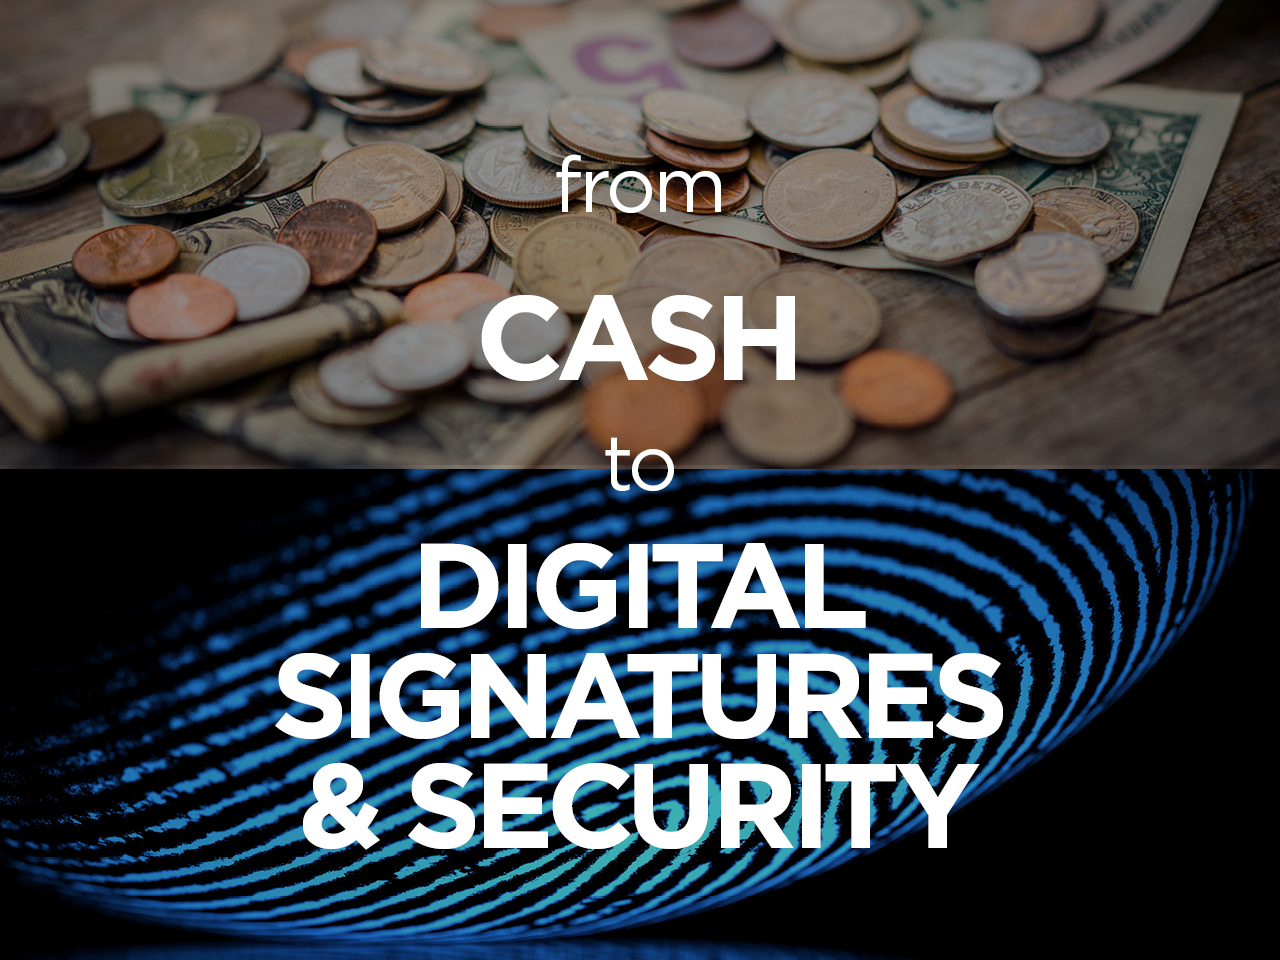 From cash to digital signatures & security 